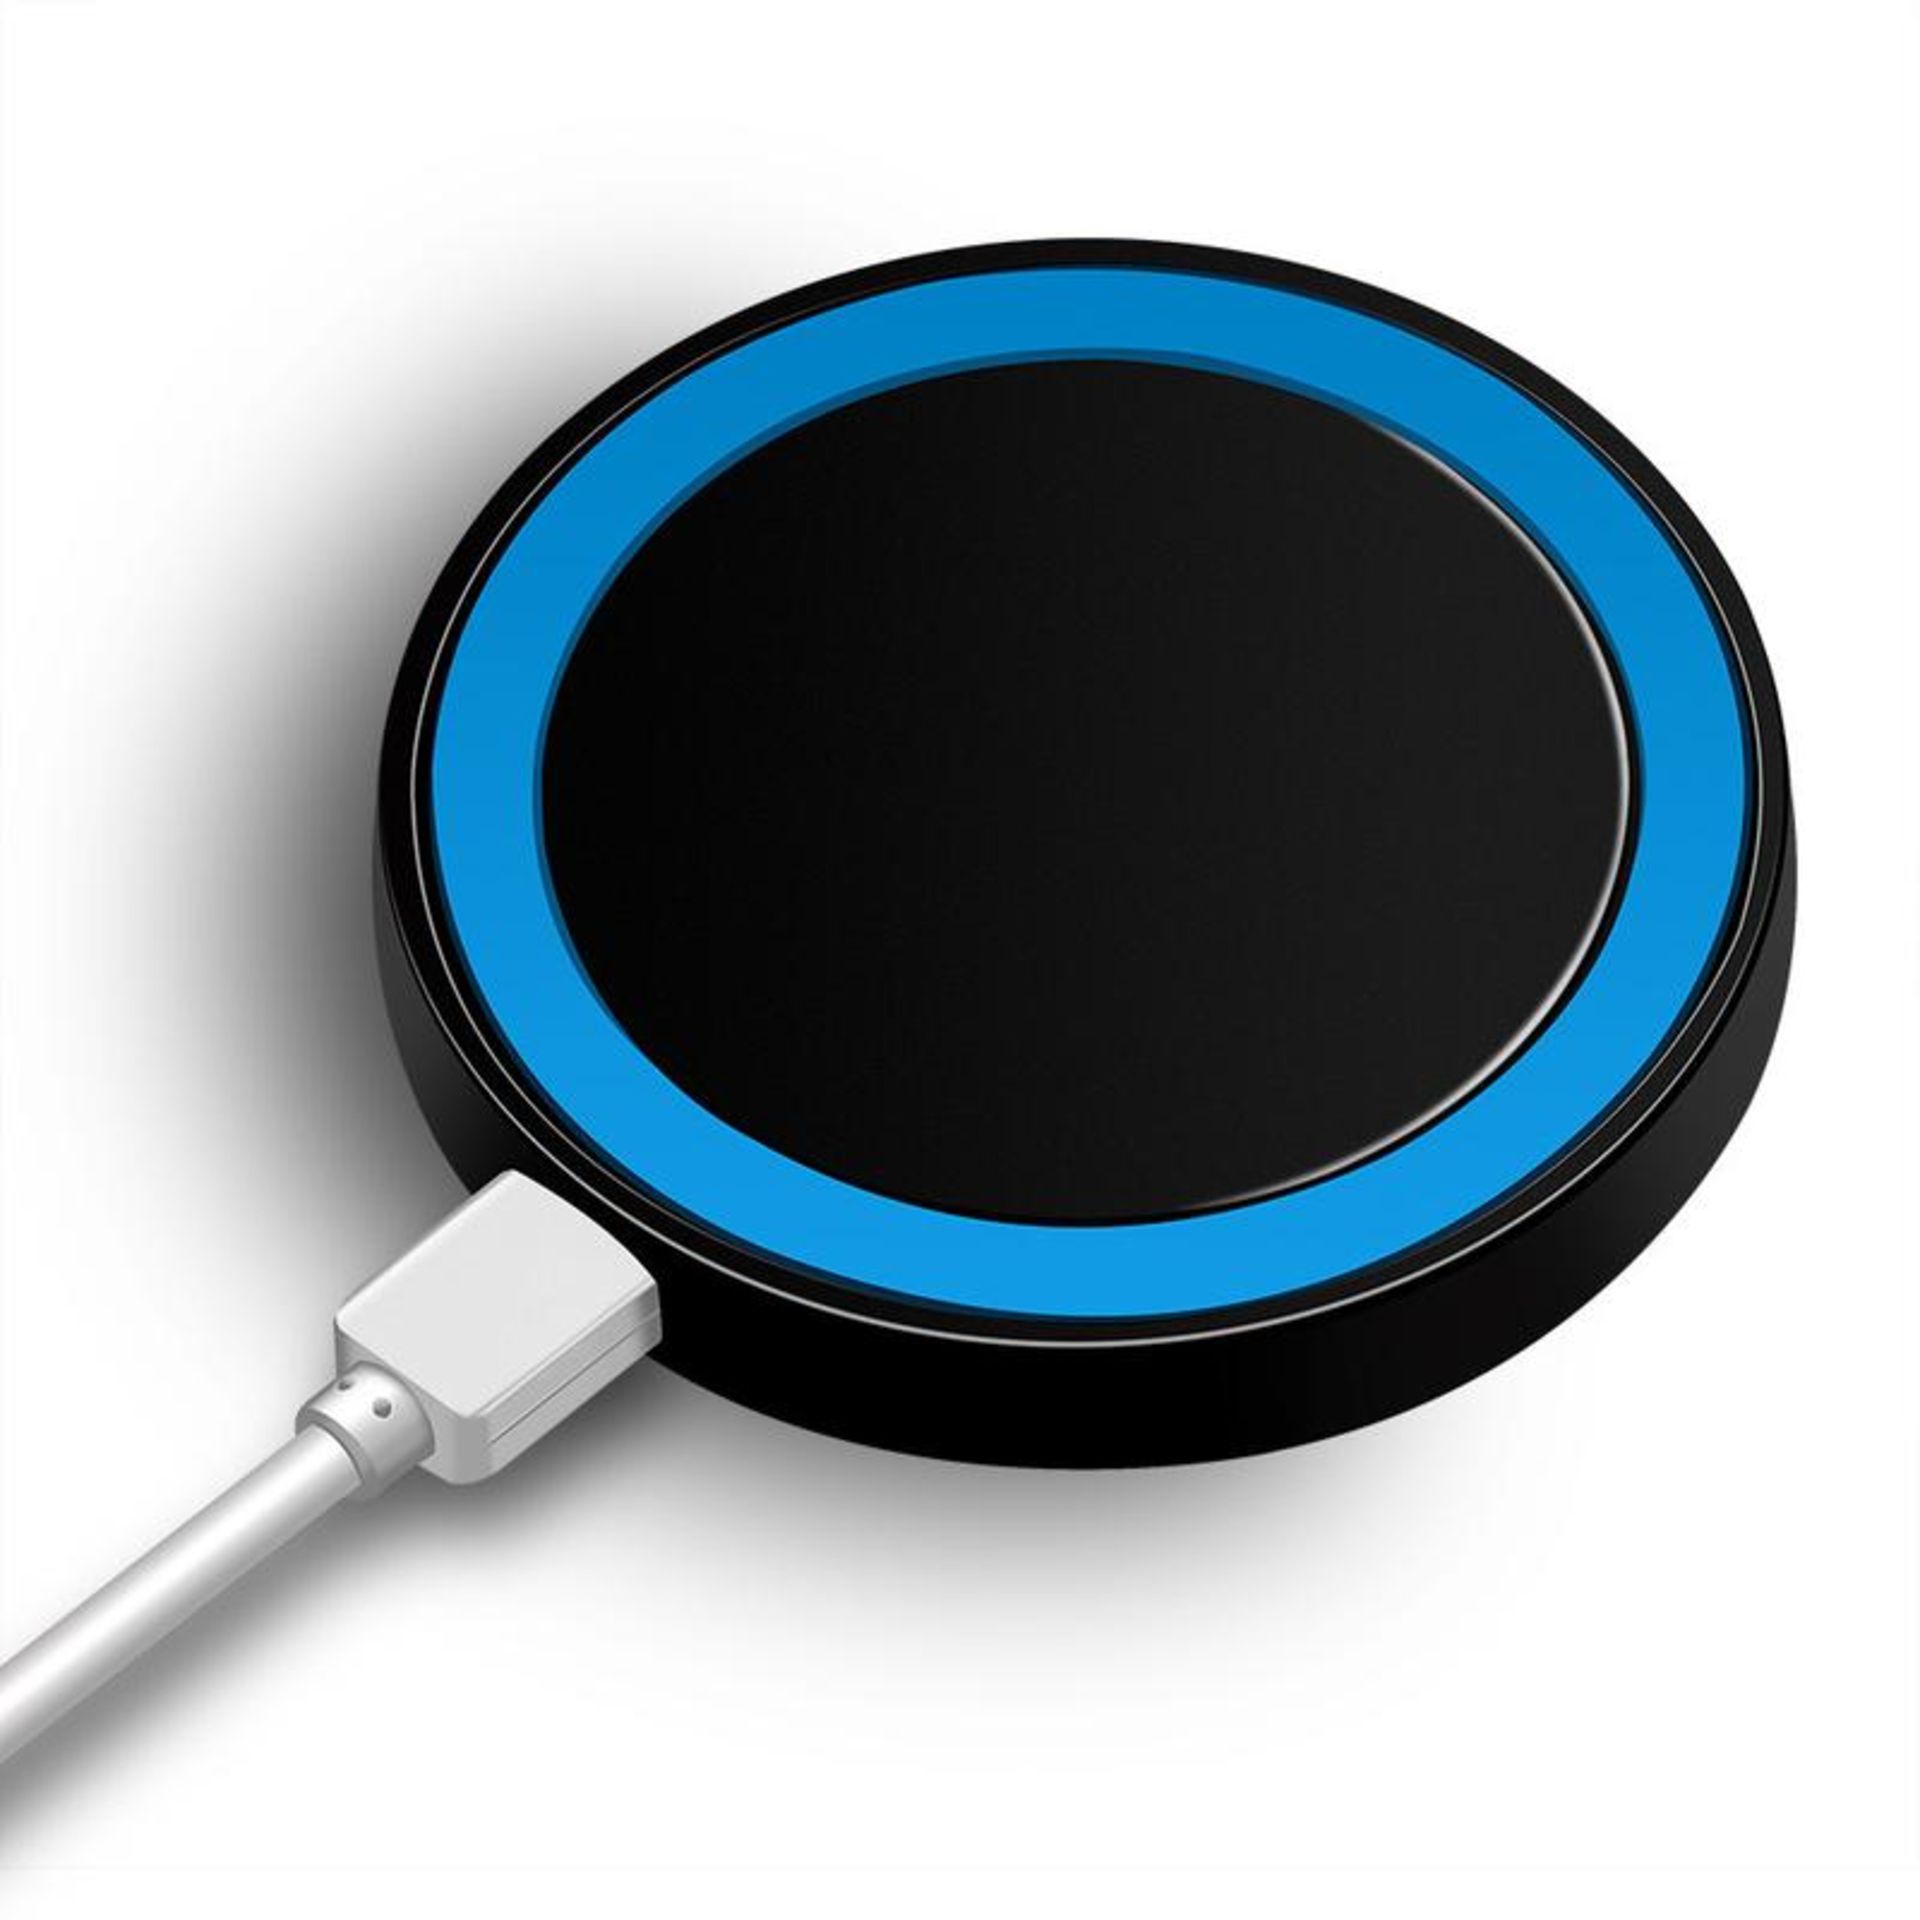 Brand New Wireless Charging Pad For Phones Etc - Includes USB Power Cable - Colours May Vary